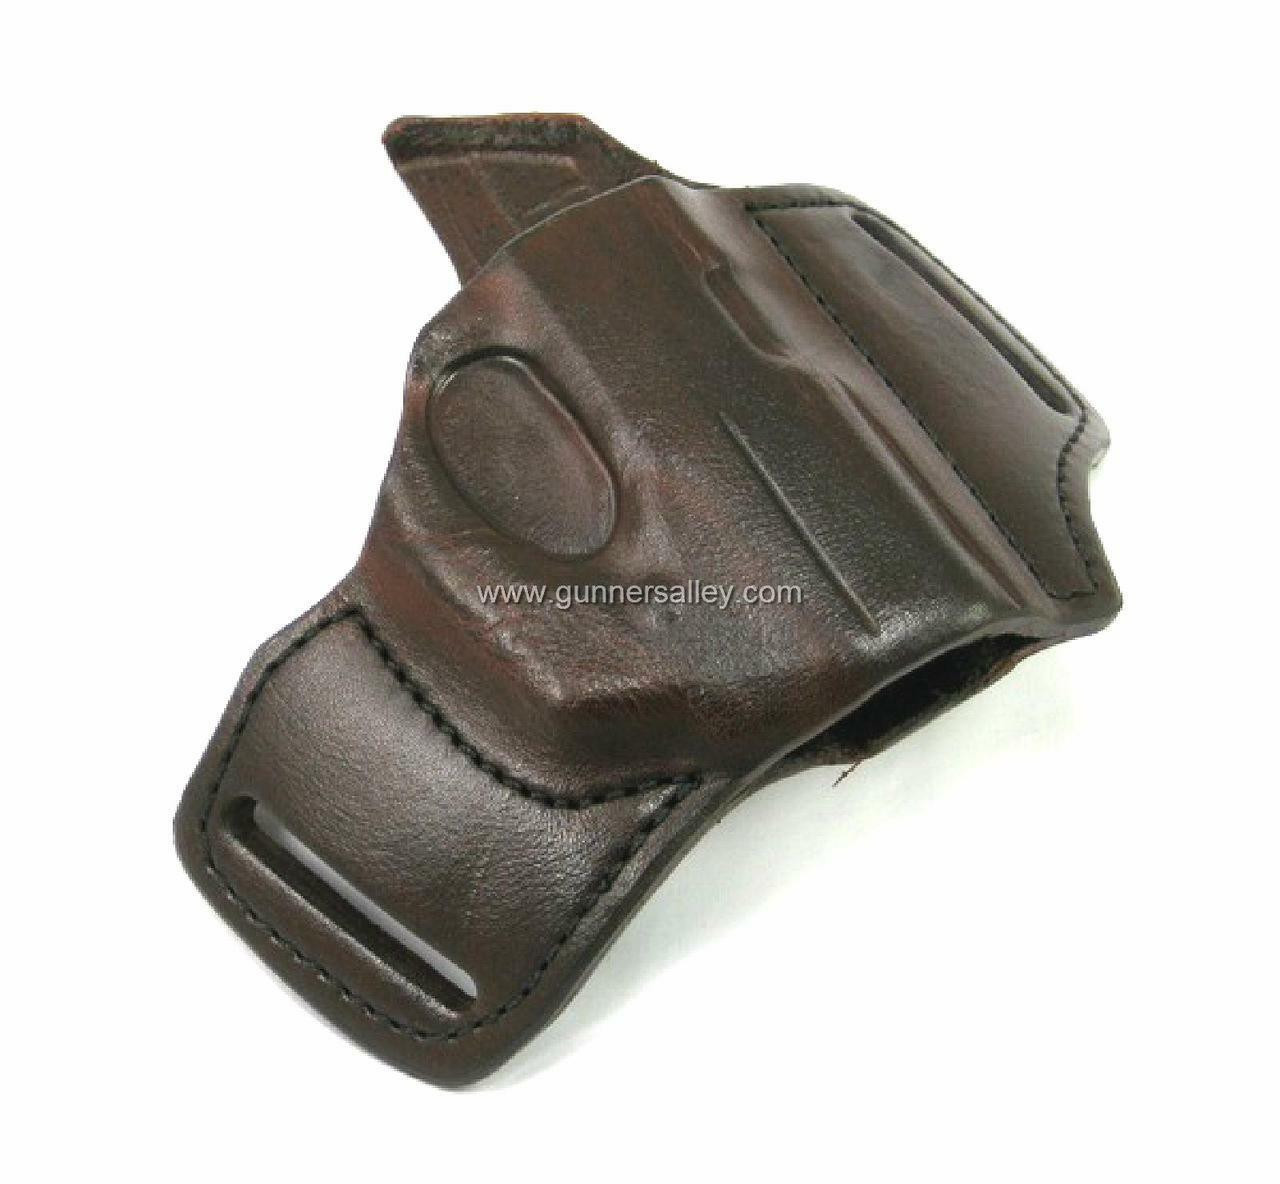 RH Mahogany MTR Custom Slimline Deluxe Pancake Holster for a Ruger LCP with Lasermax Centerfire Laser